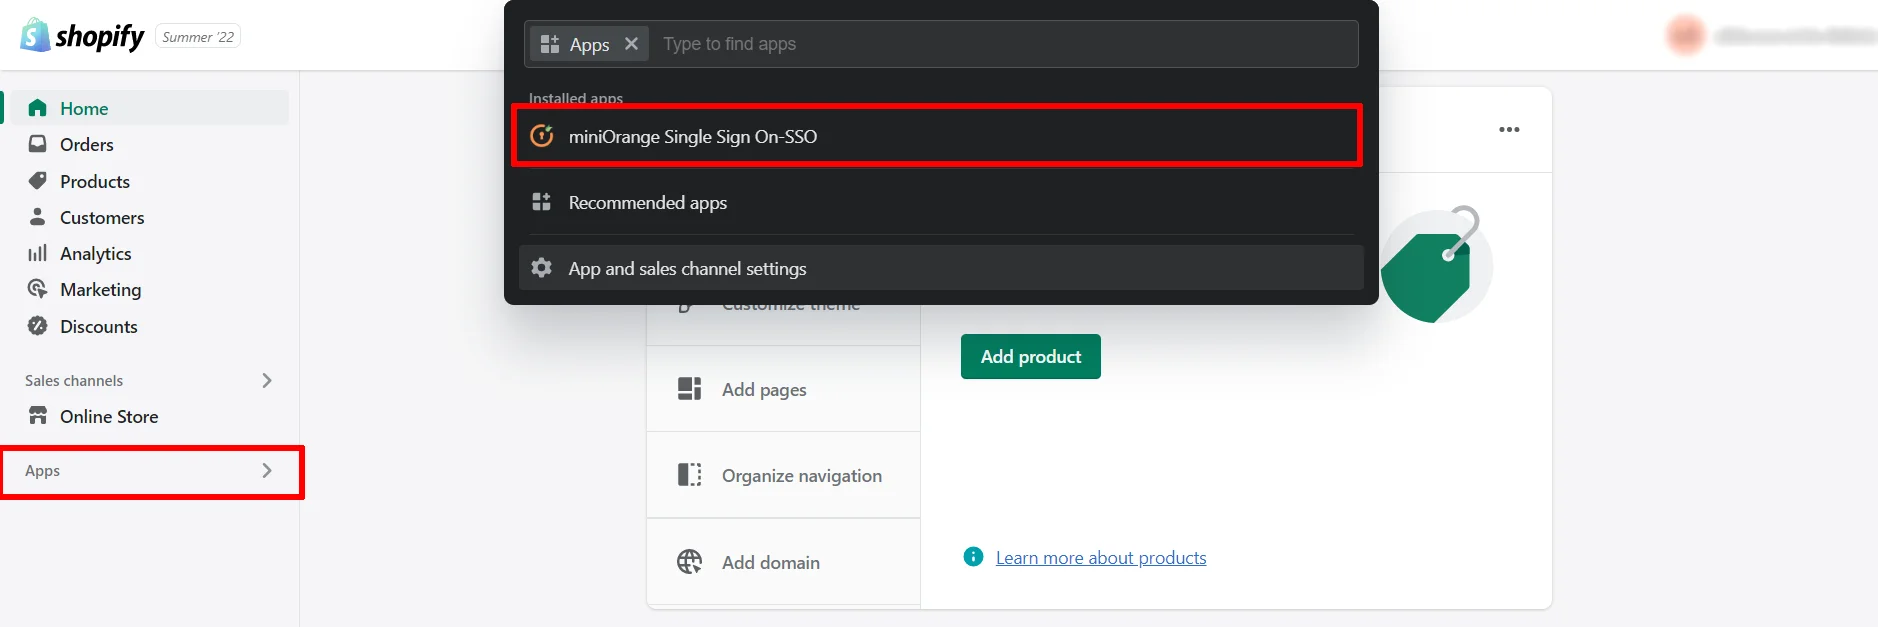 Workday Shopify SSO - Sigle Sign on into SHopify using Workday as IDP - single sign on application